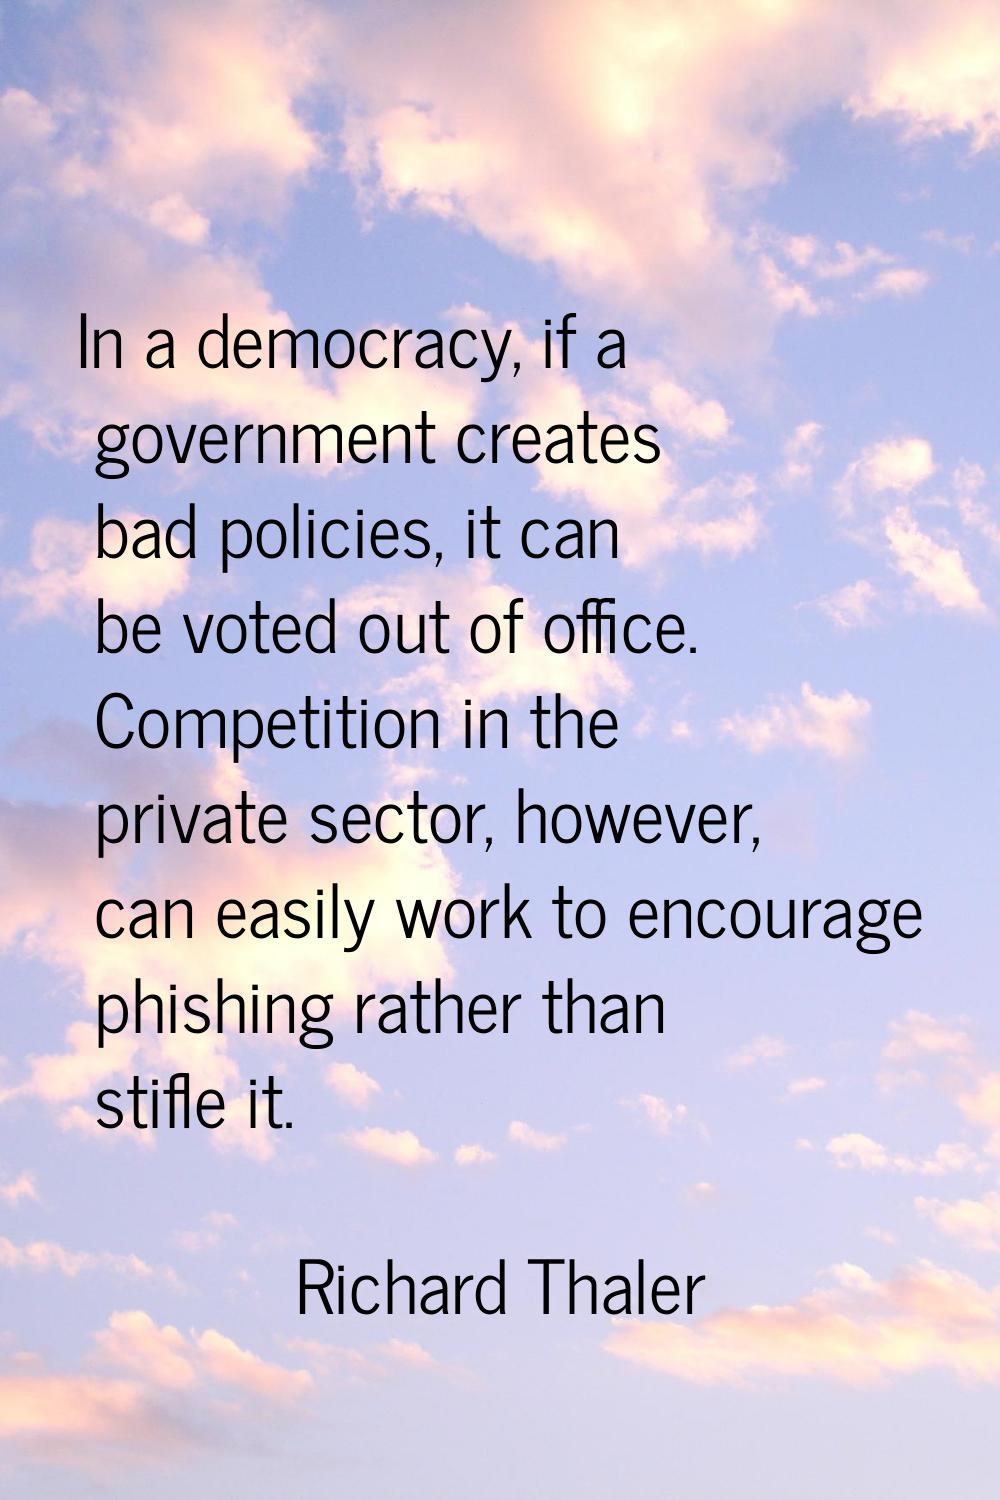 In a democracy, if a government creates bad policies, it can be voted out of office. Competition in